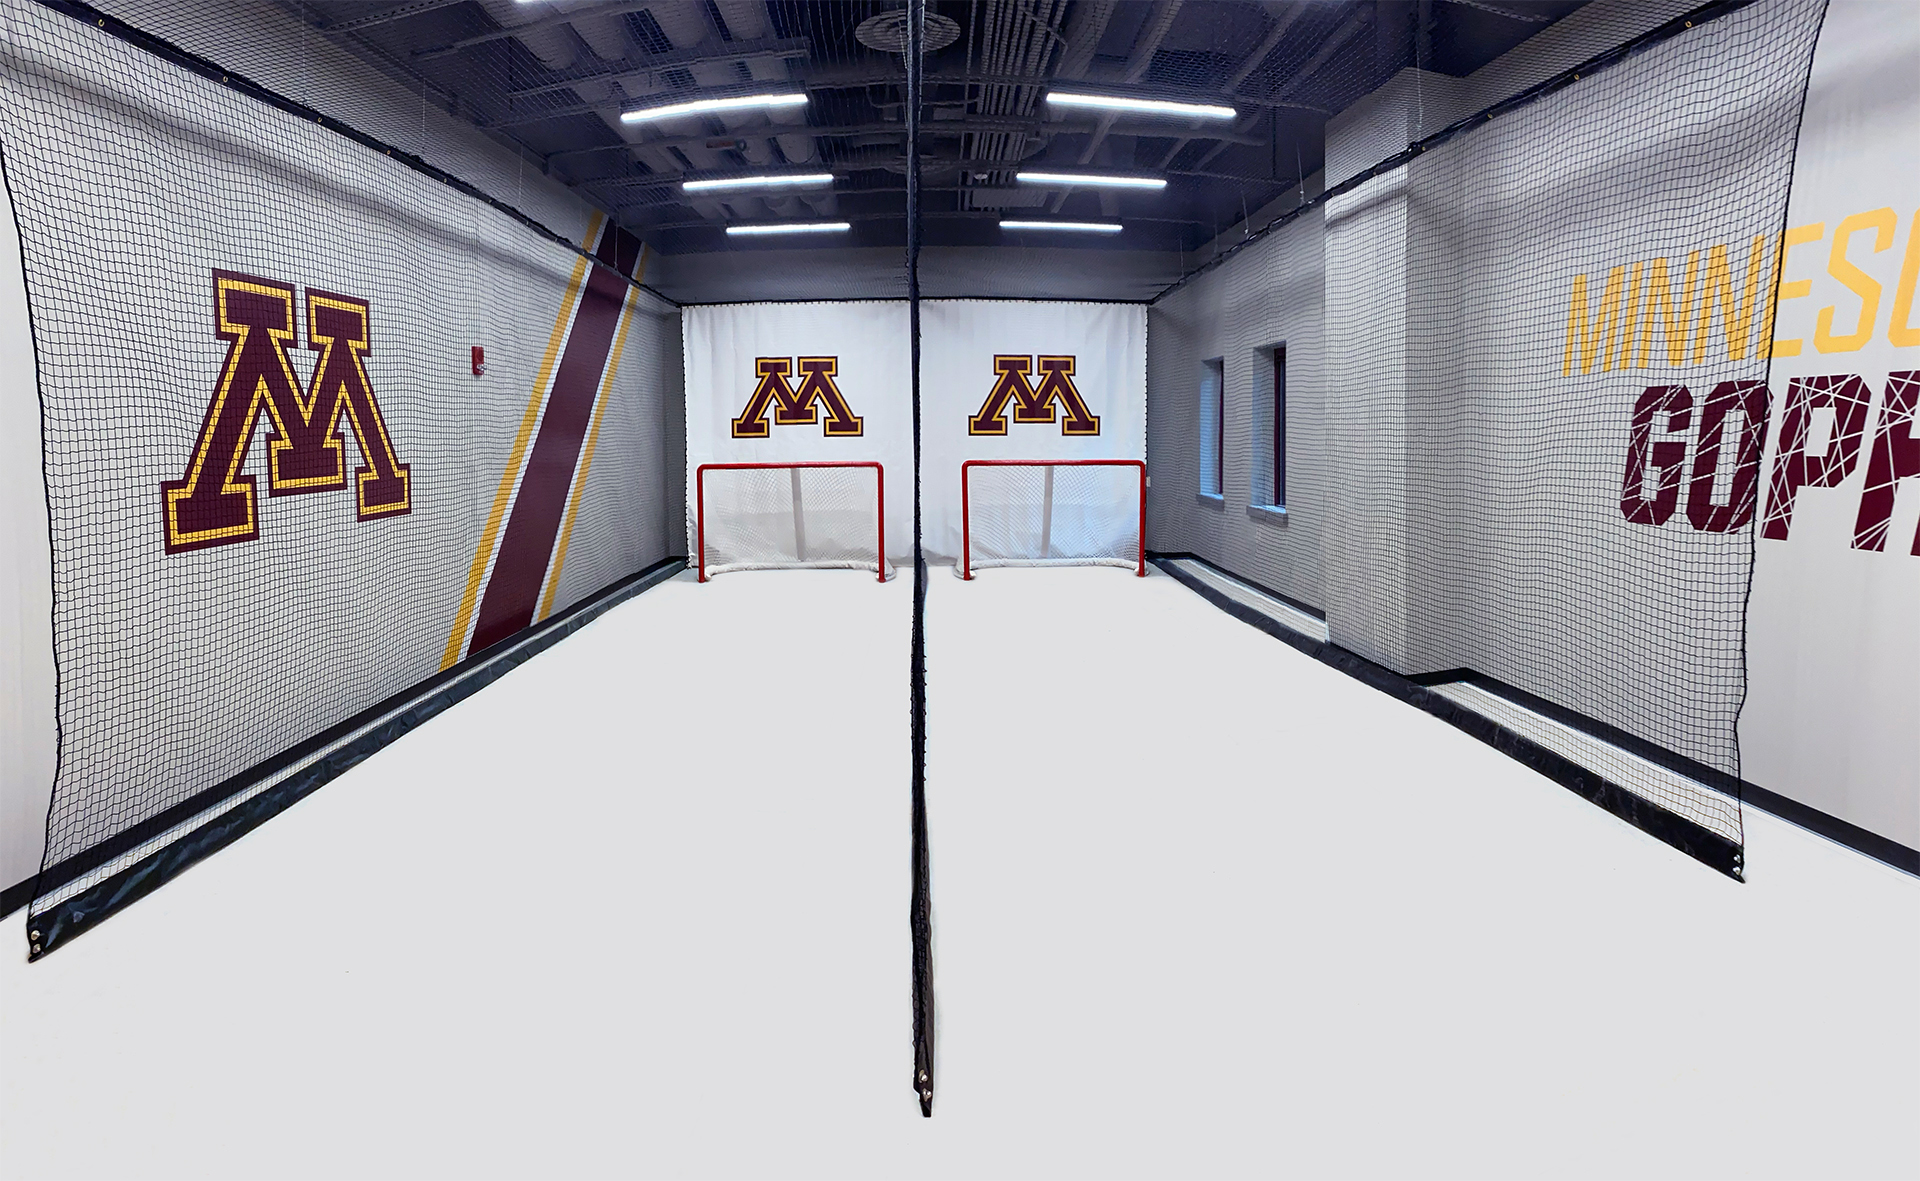 Gopher Athletics get a new shooting station